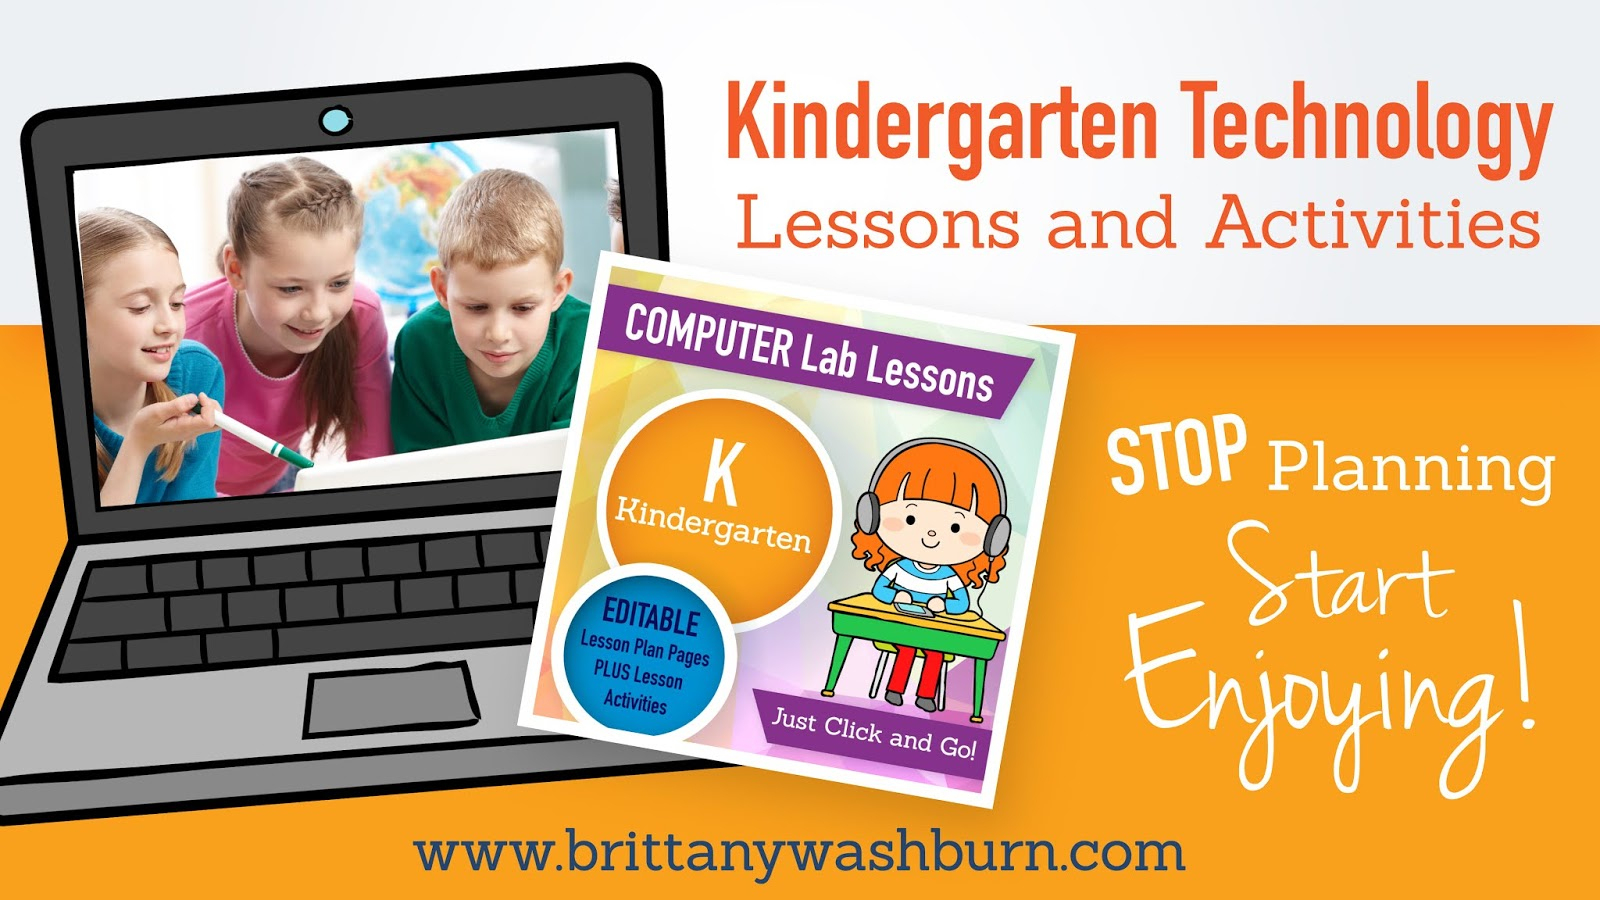 Technology Teaching Resources With Brittany Washburn